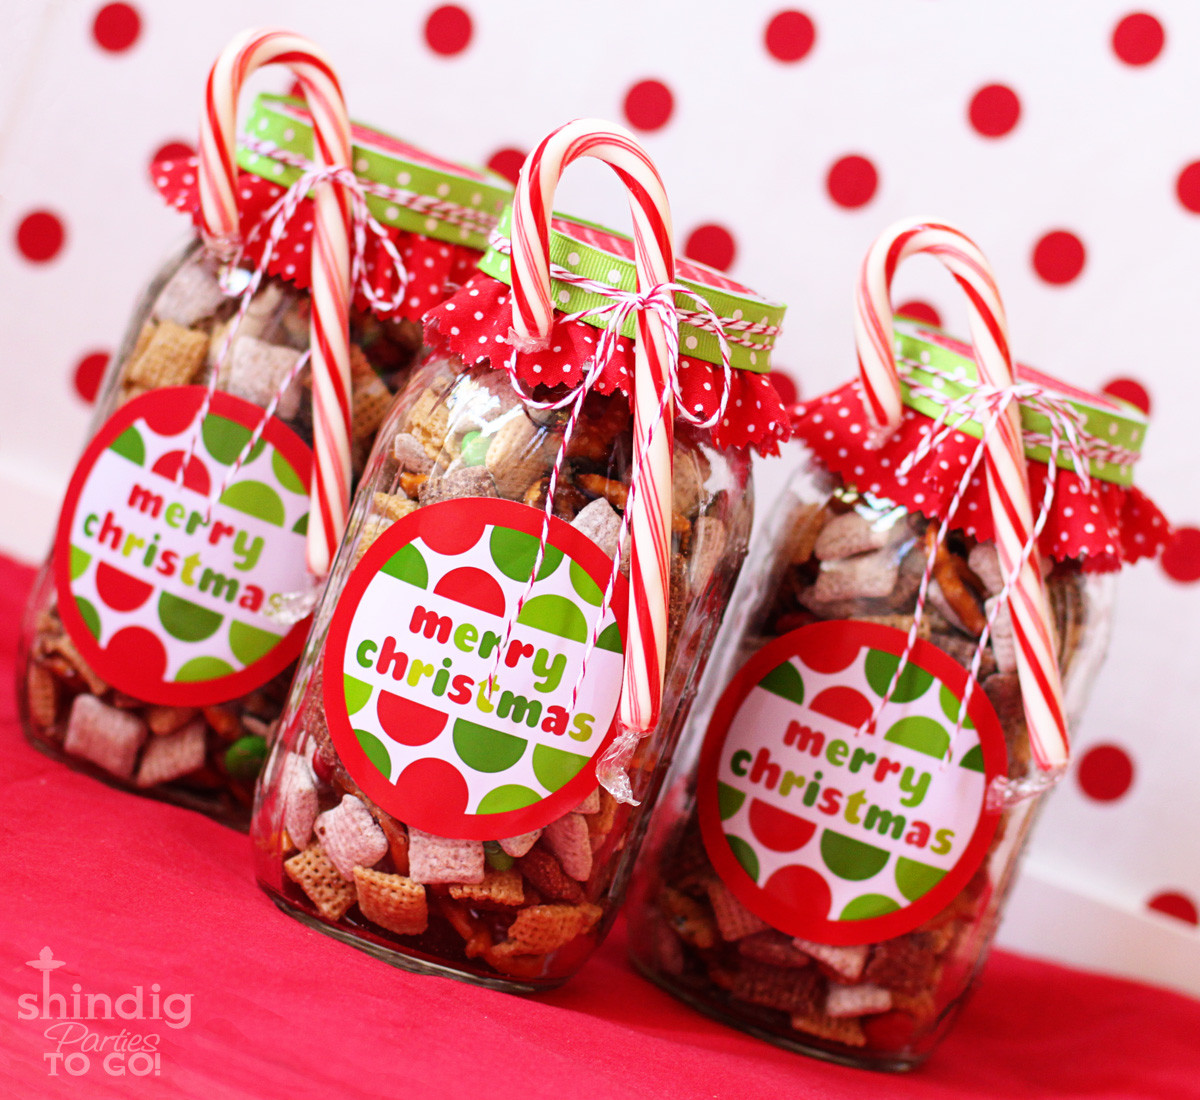 Christmas Candy Gift Ideas
 How To Make Handmade Chex Mix Holiday Gifts & Bonus Free